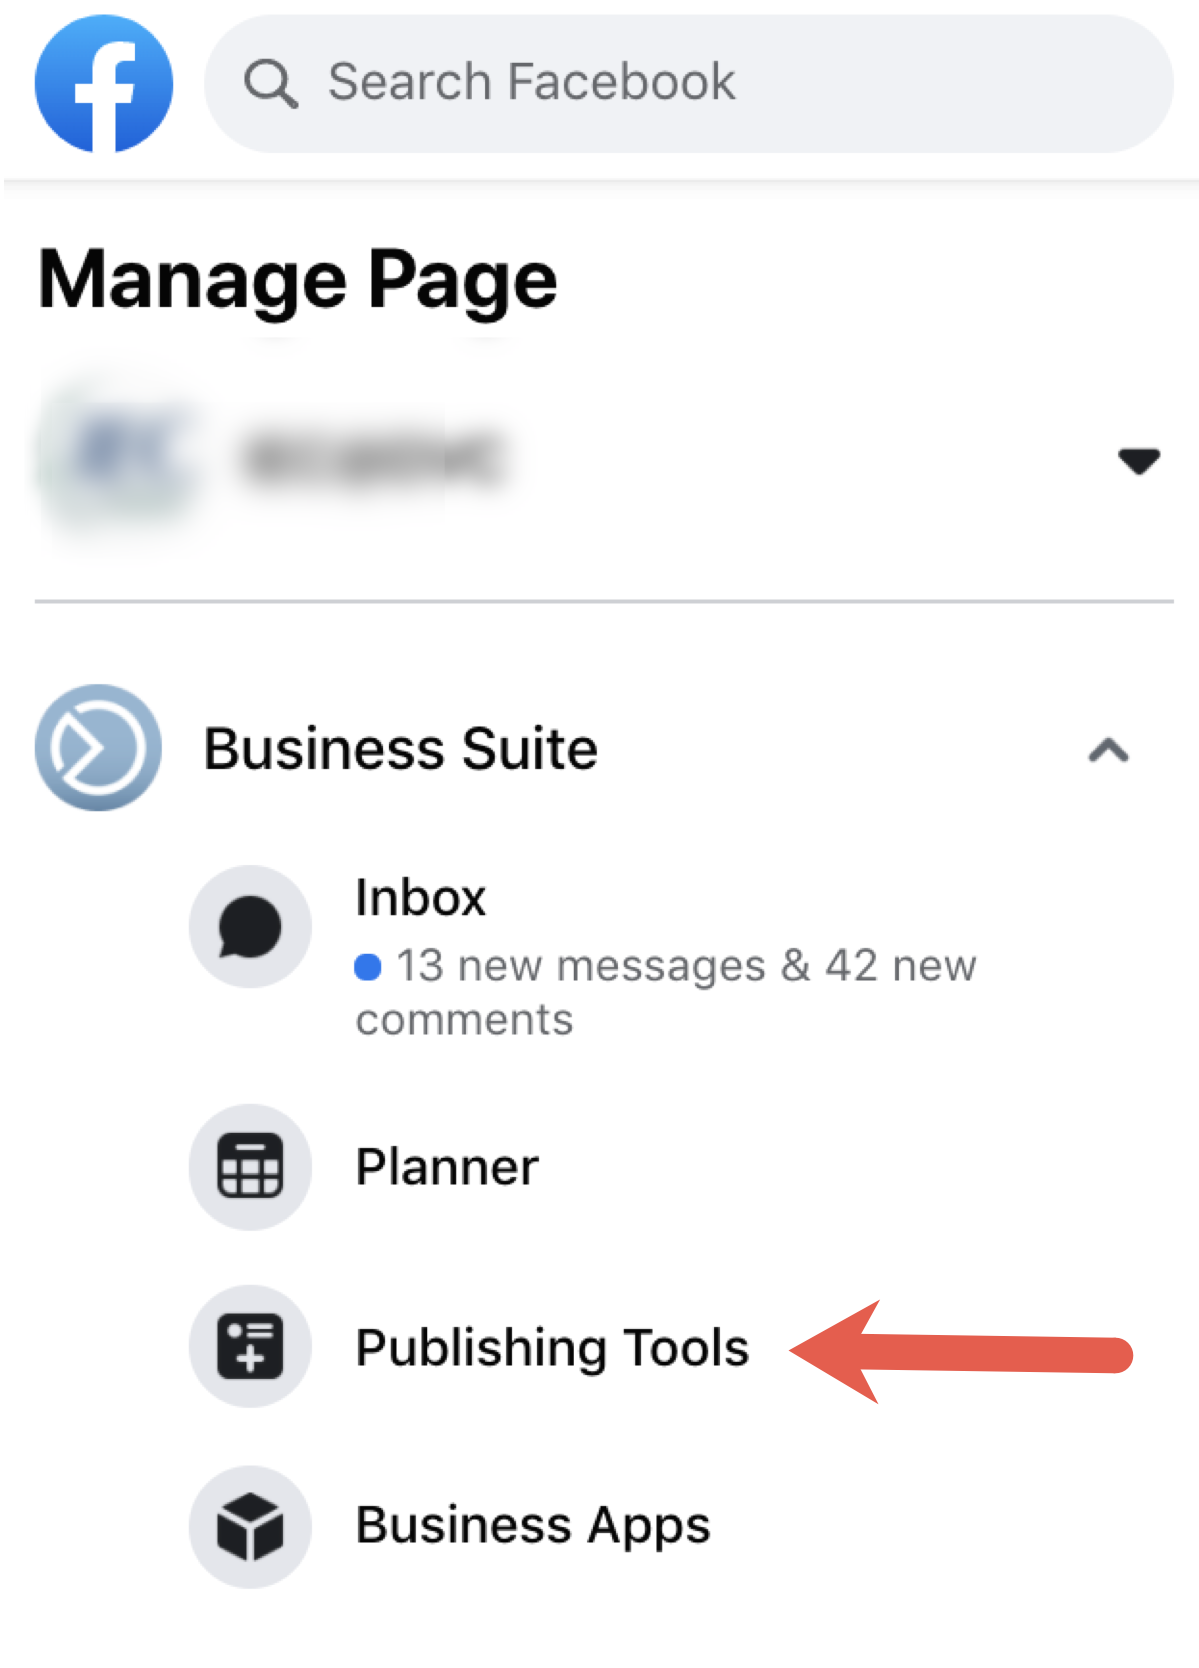 under-business-tools-select-publishing-tools